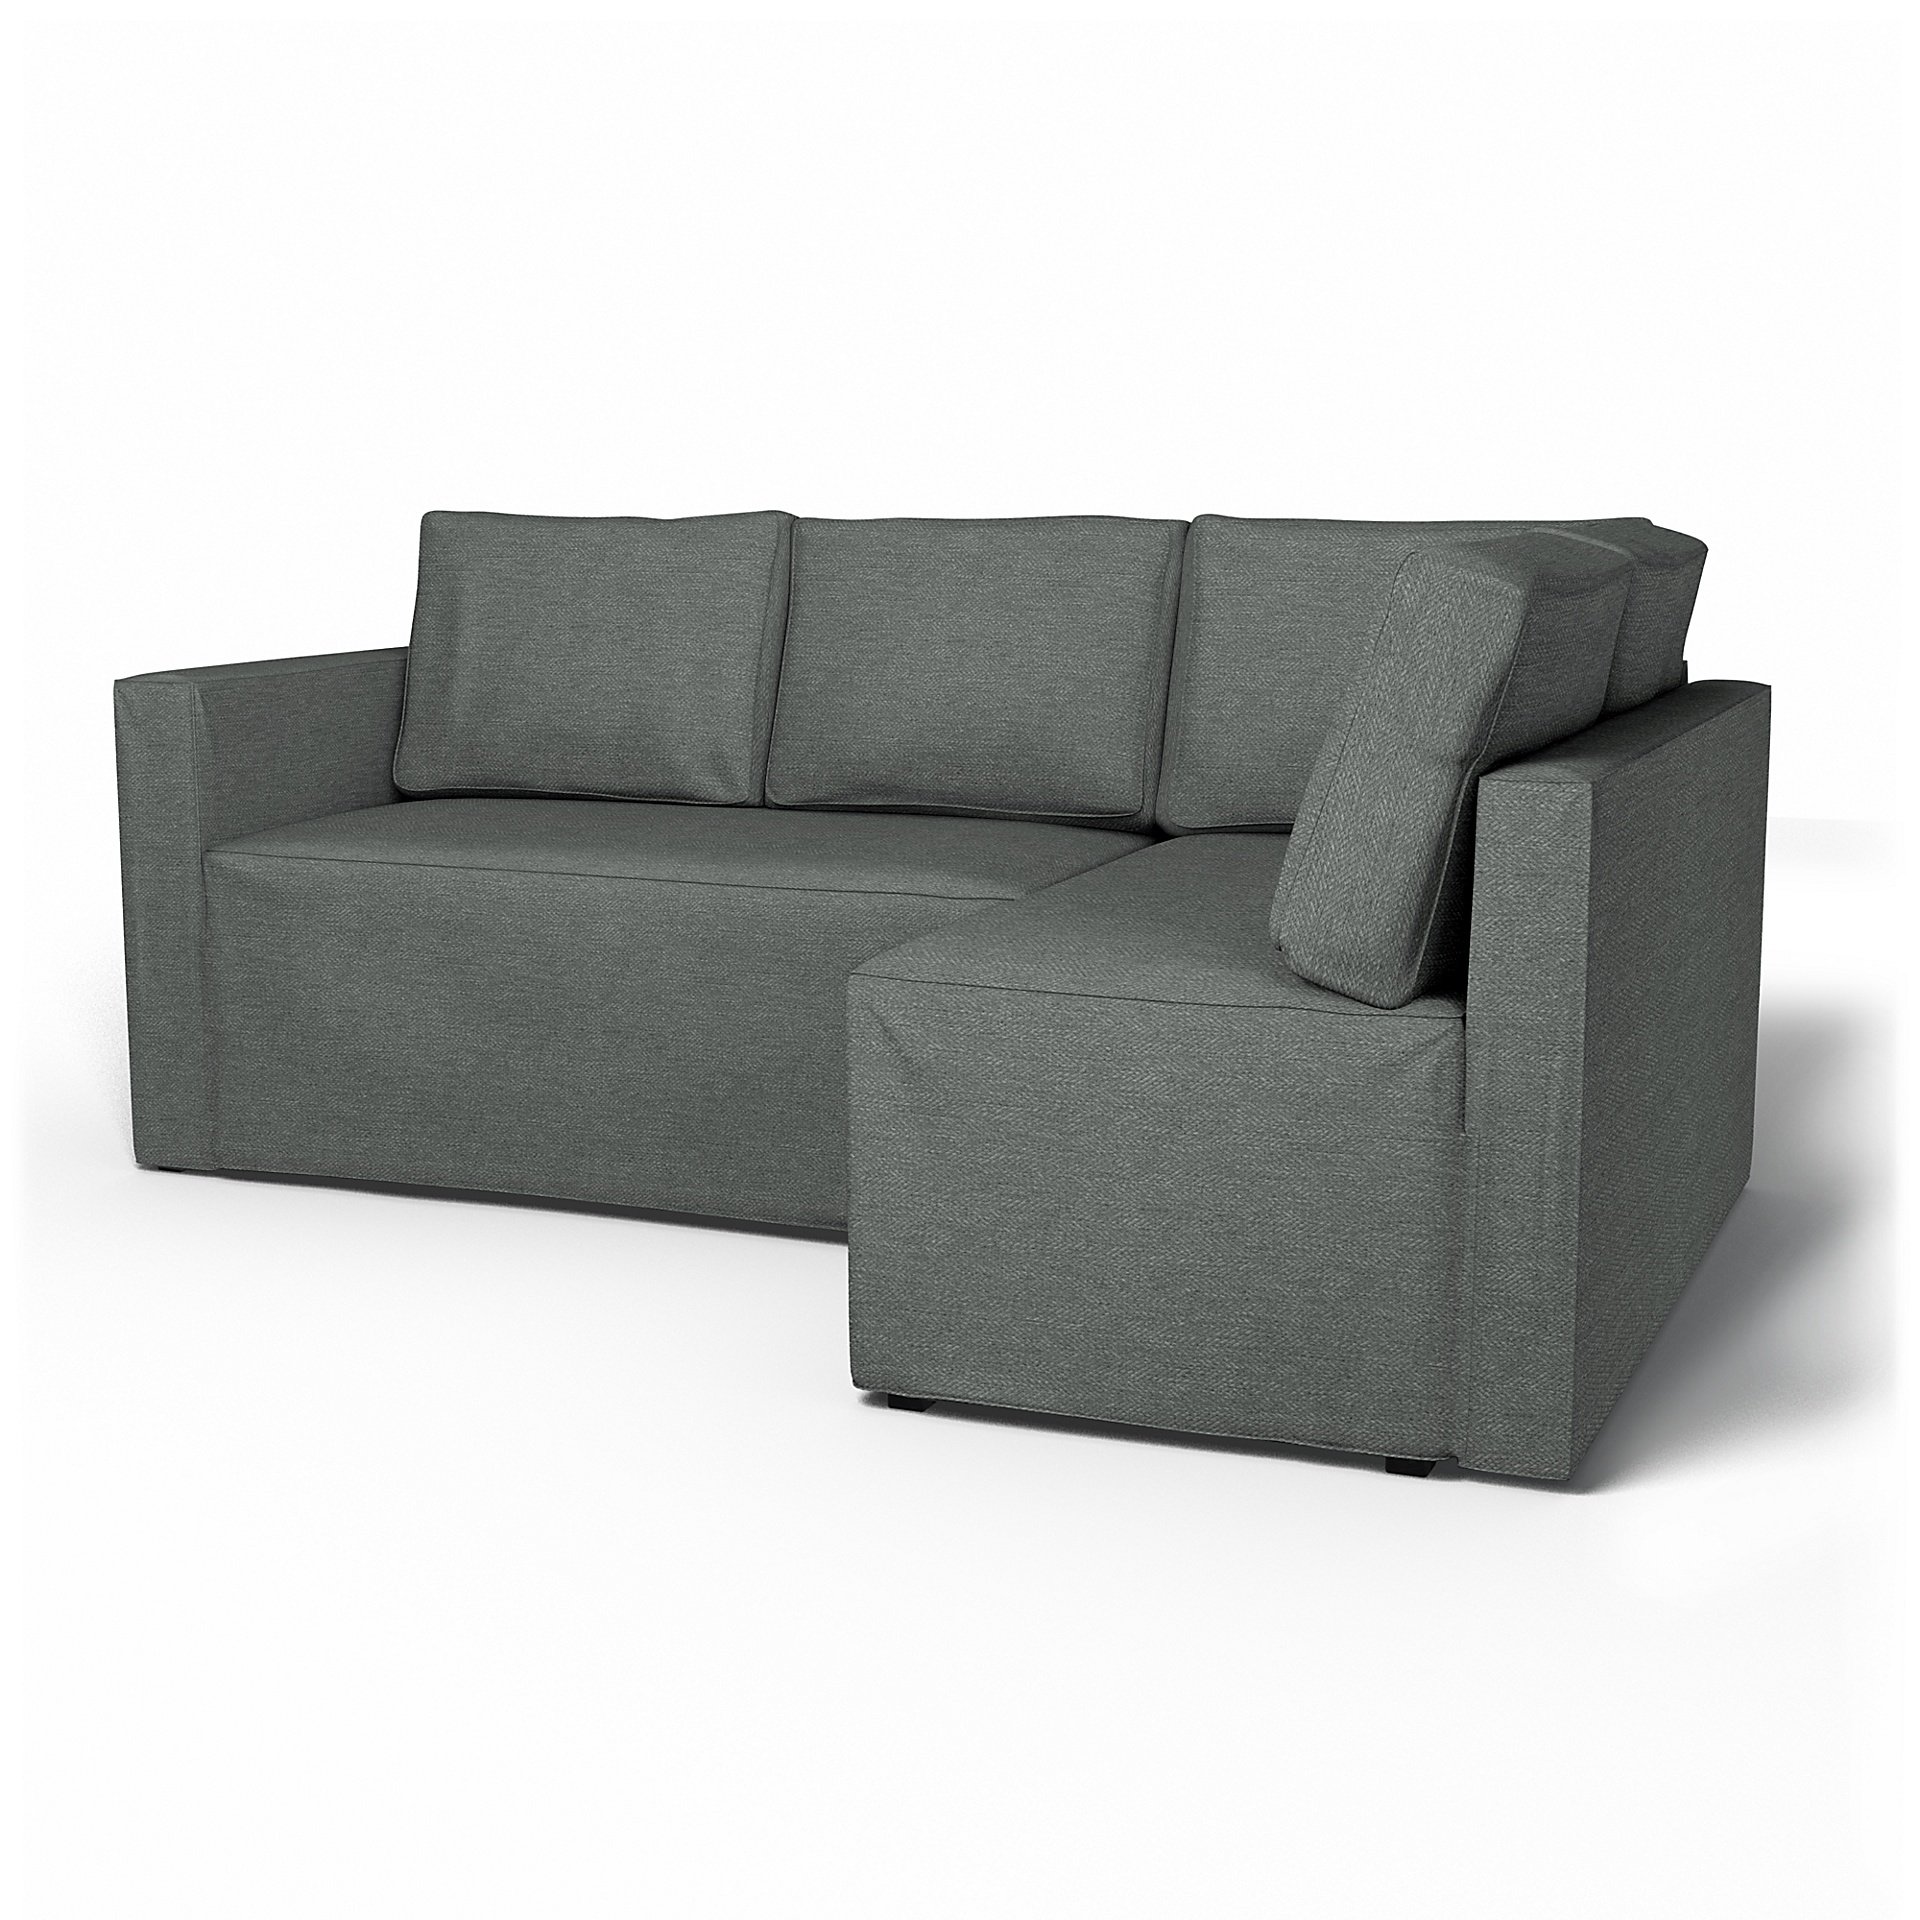 IKEA - Fagelbo Sofa Bed with Right Chaise Cover, Laurel, Boucle & Texture - Bemz